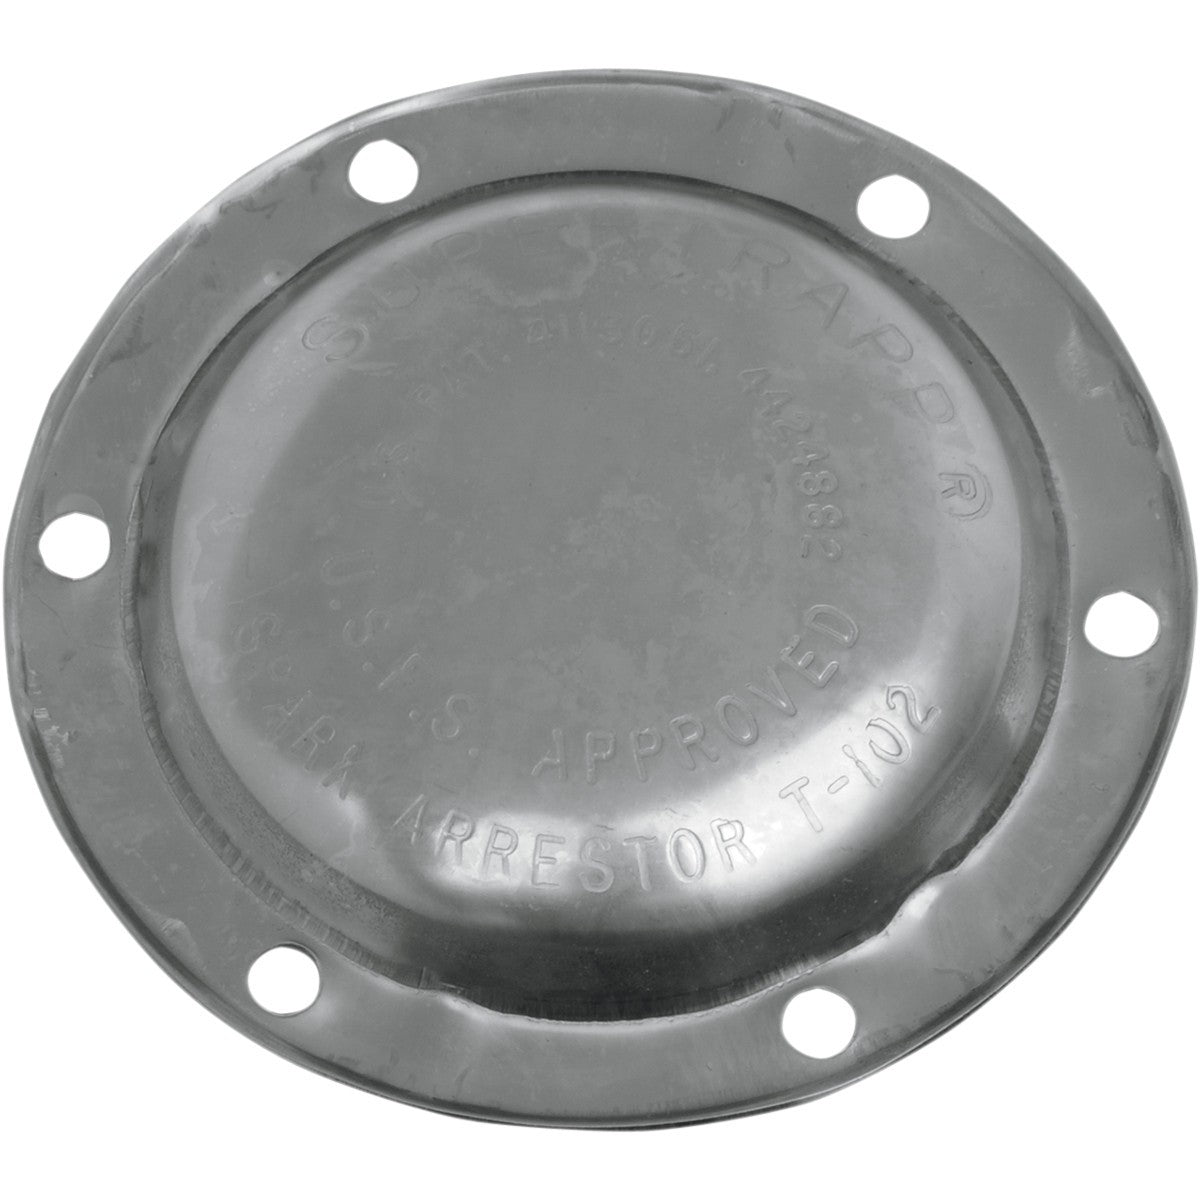 Supertrapp Exhaust End Cap Stainless Steal 6-Bolt Style - Peakboys